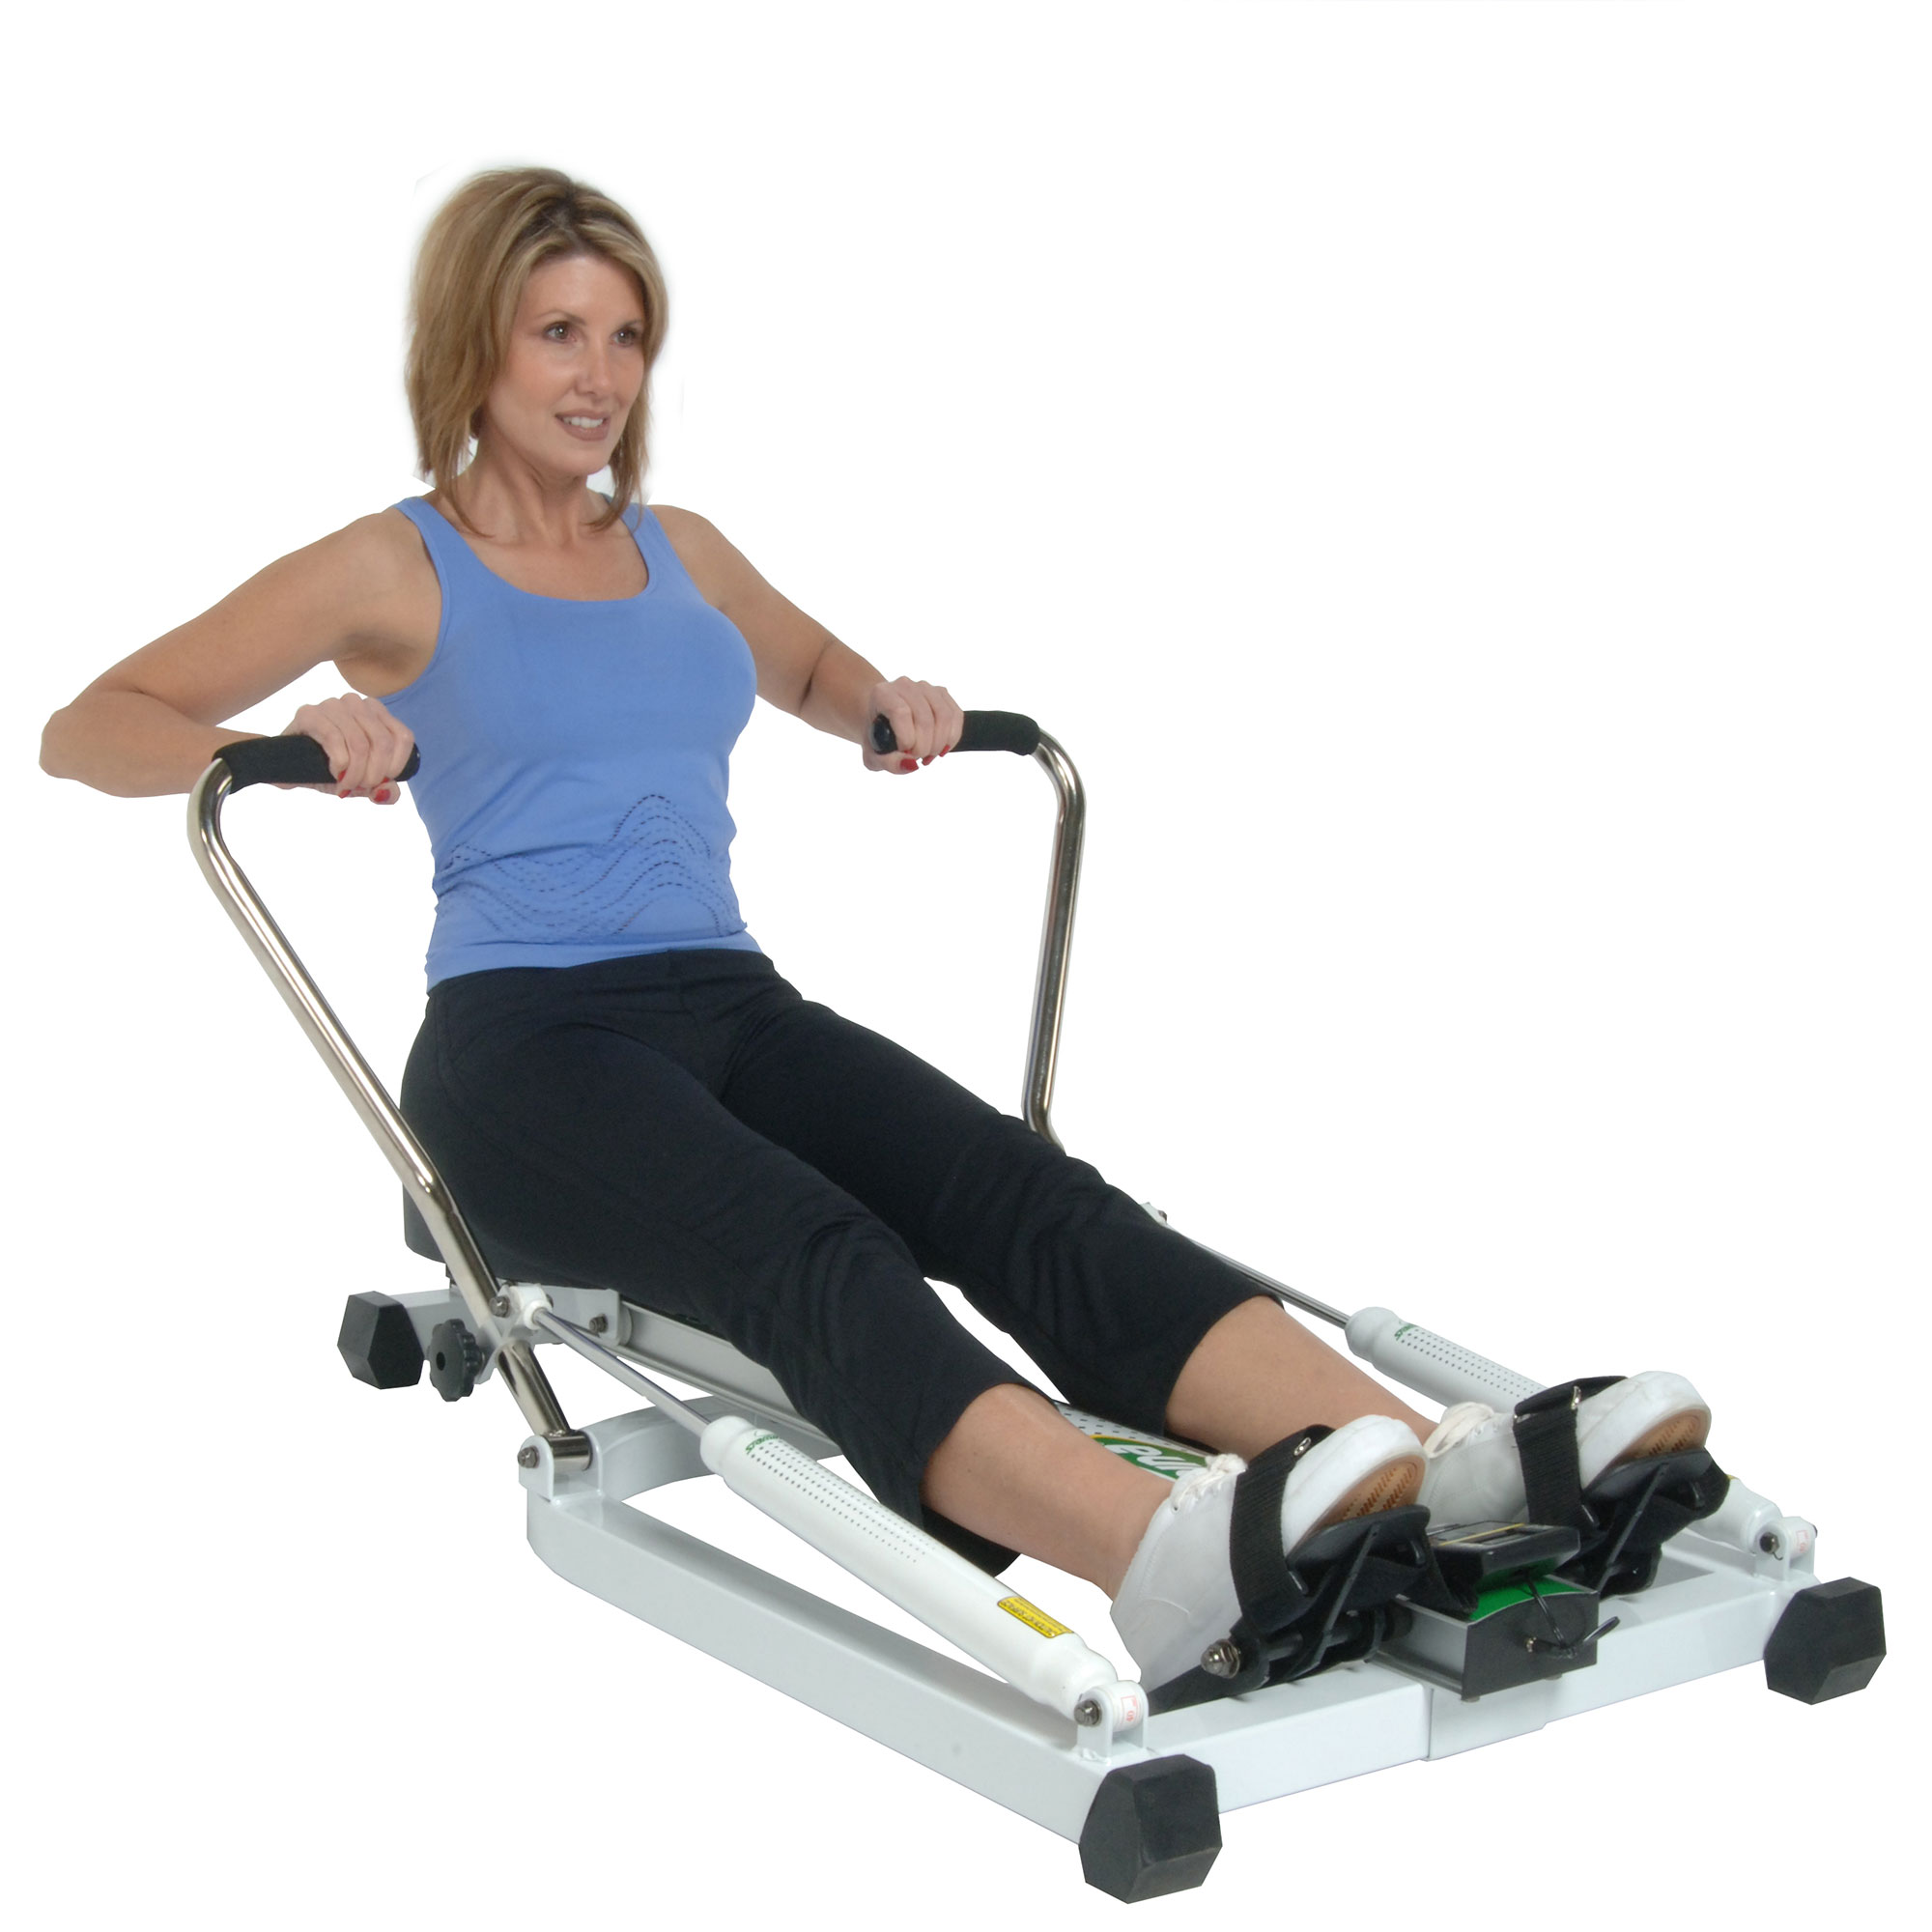 Stamina Products 35-1205 Low Impact Home Fitness Precision Rowing Machine - image 2 of 6